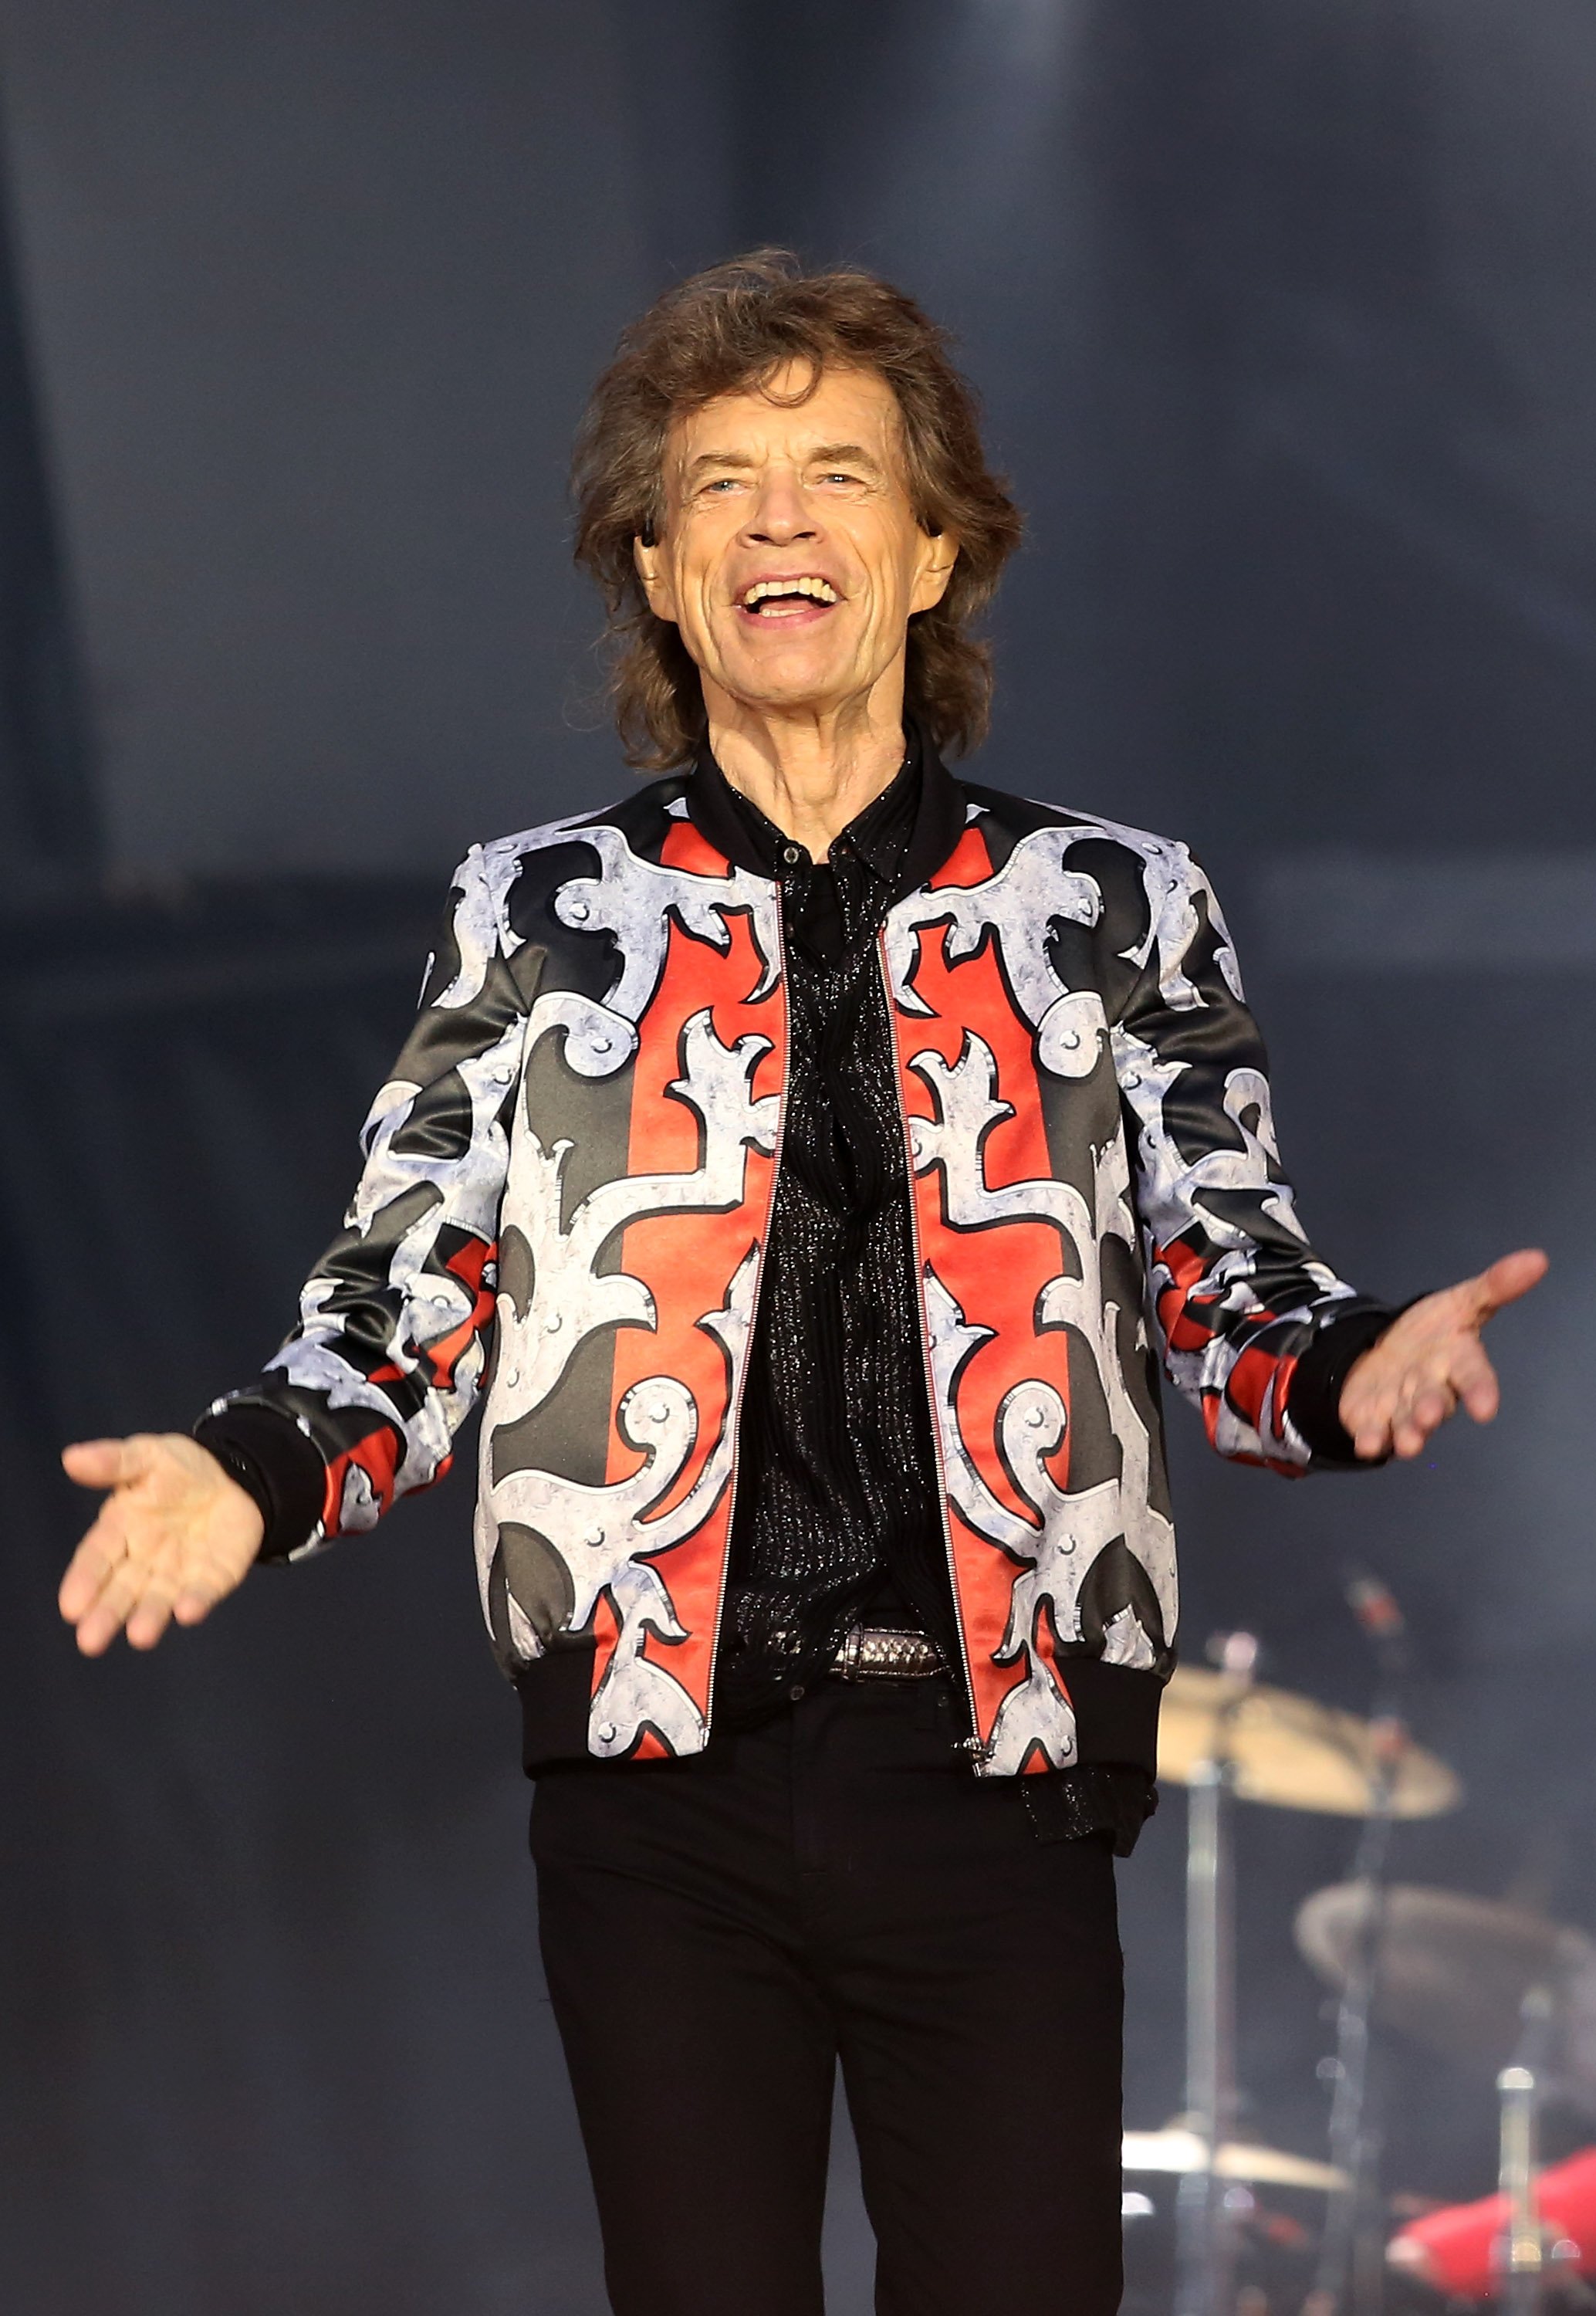 Mick Jagger performs on stage at the "No Filter" tour in London, England on May 25, 2018 | Photo: Getty Images